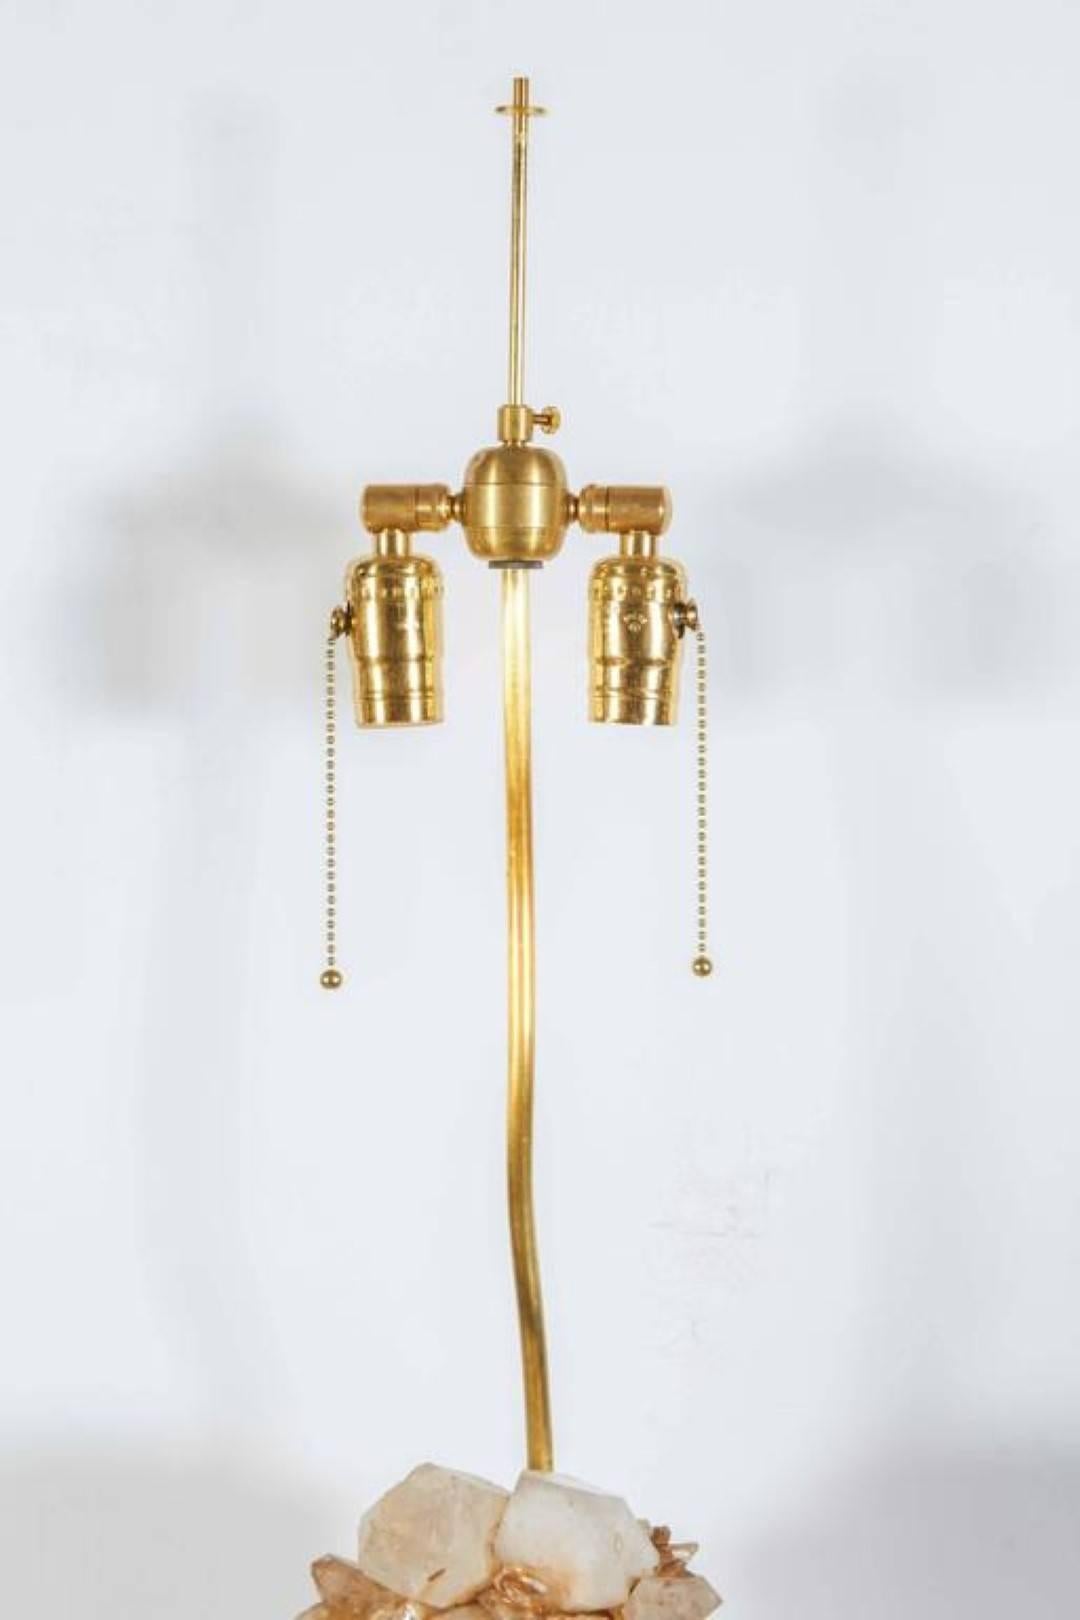 A Carol Stupell quartz rock crystal table lamp, organic form rock crystal spears resting on a two tiered giltwood plinth base, with double cluster fitting, wired for electricity.